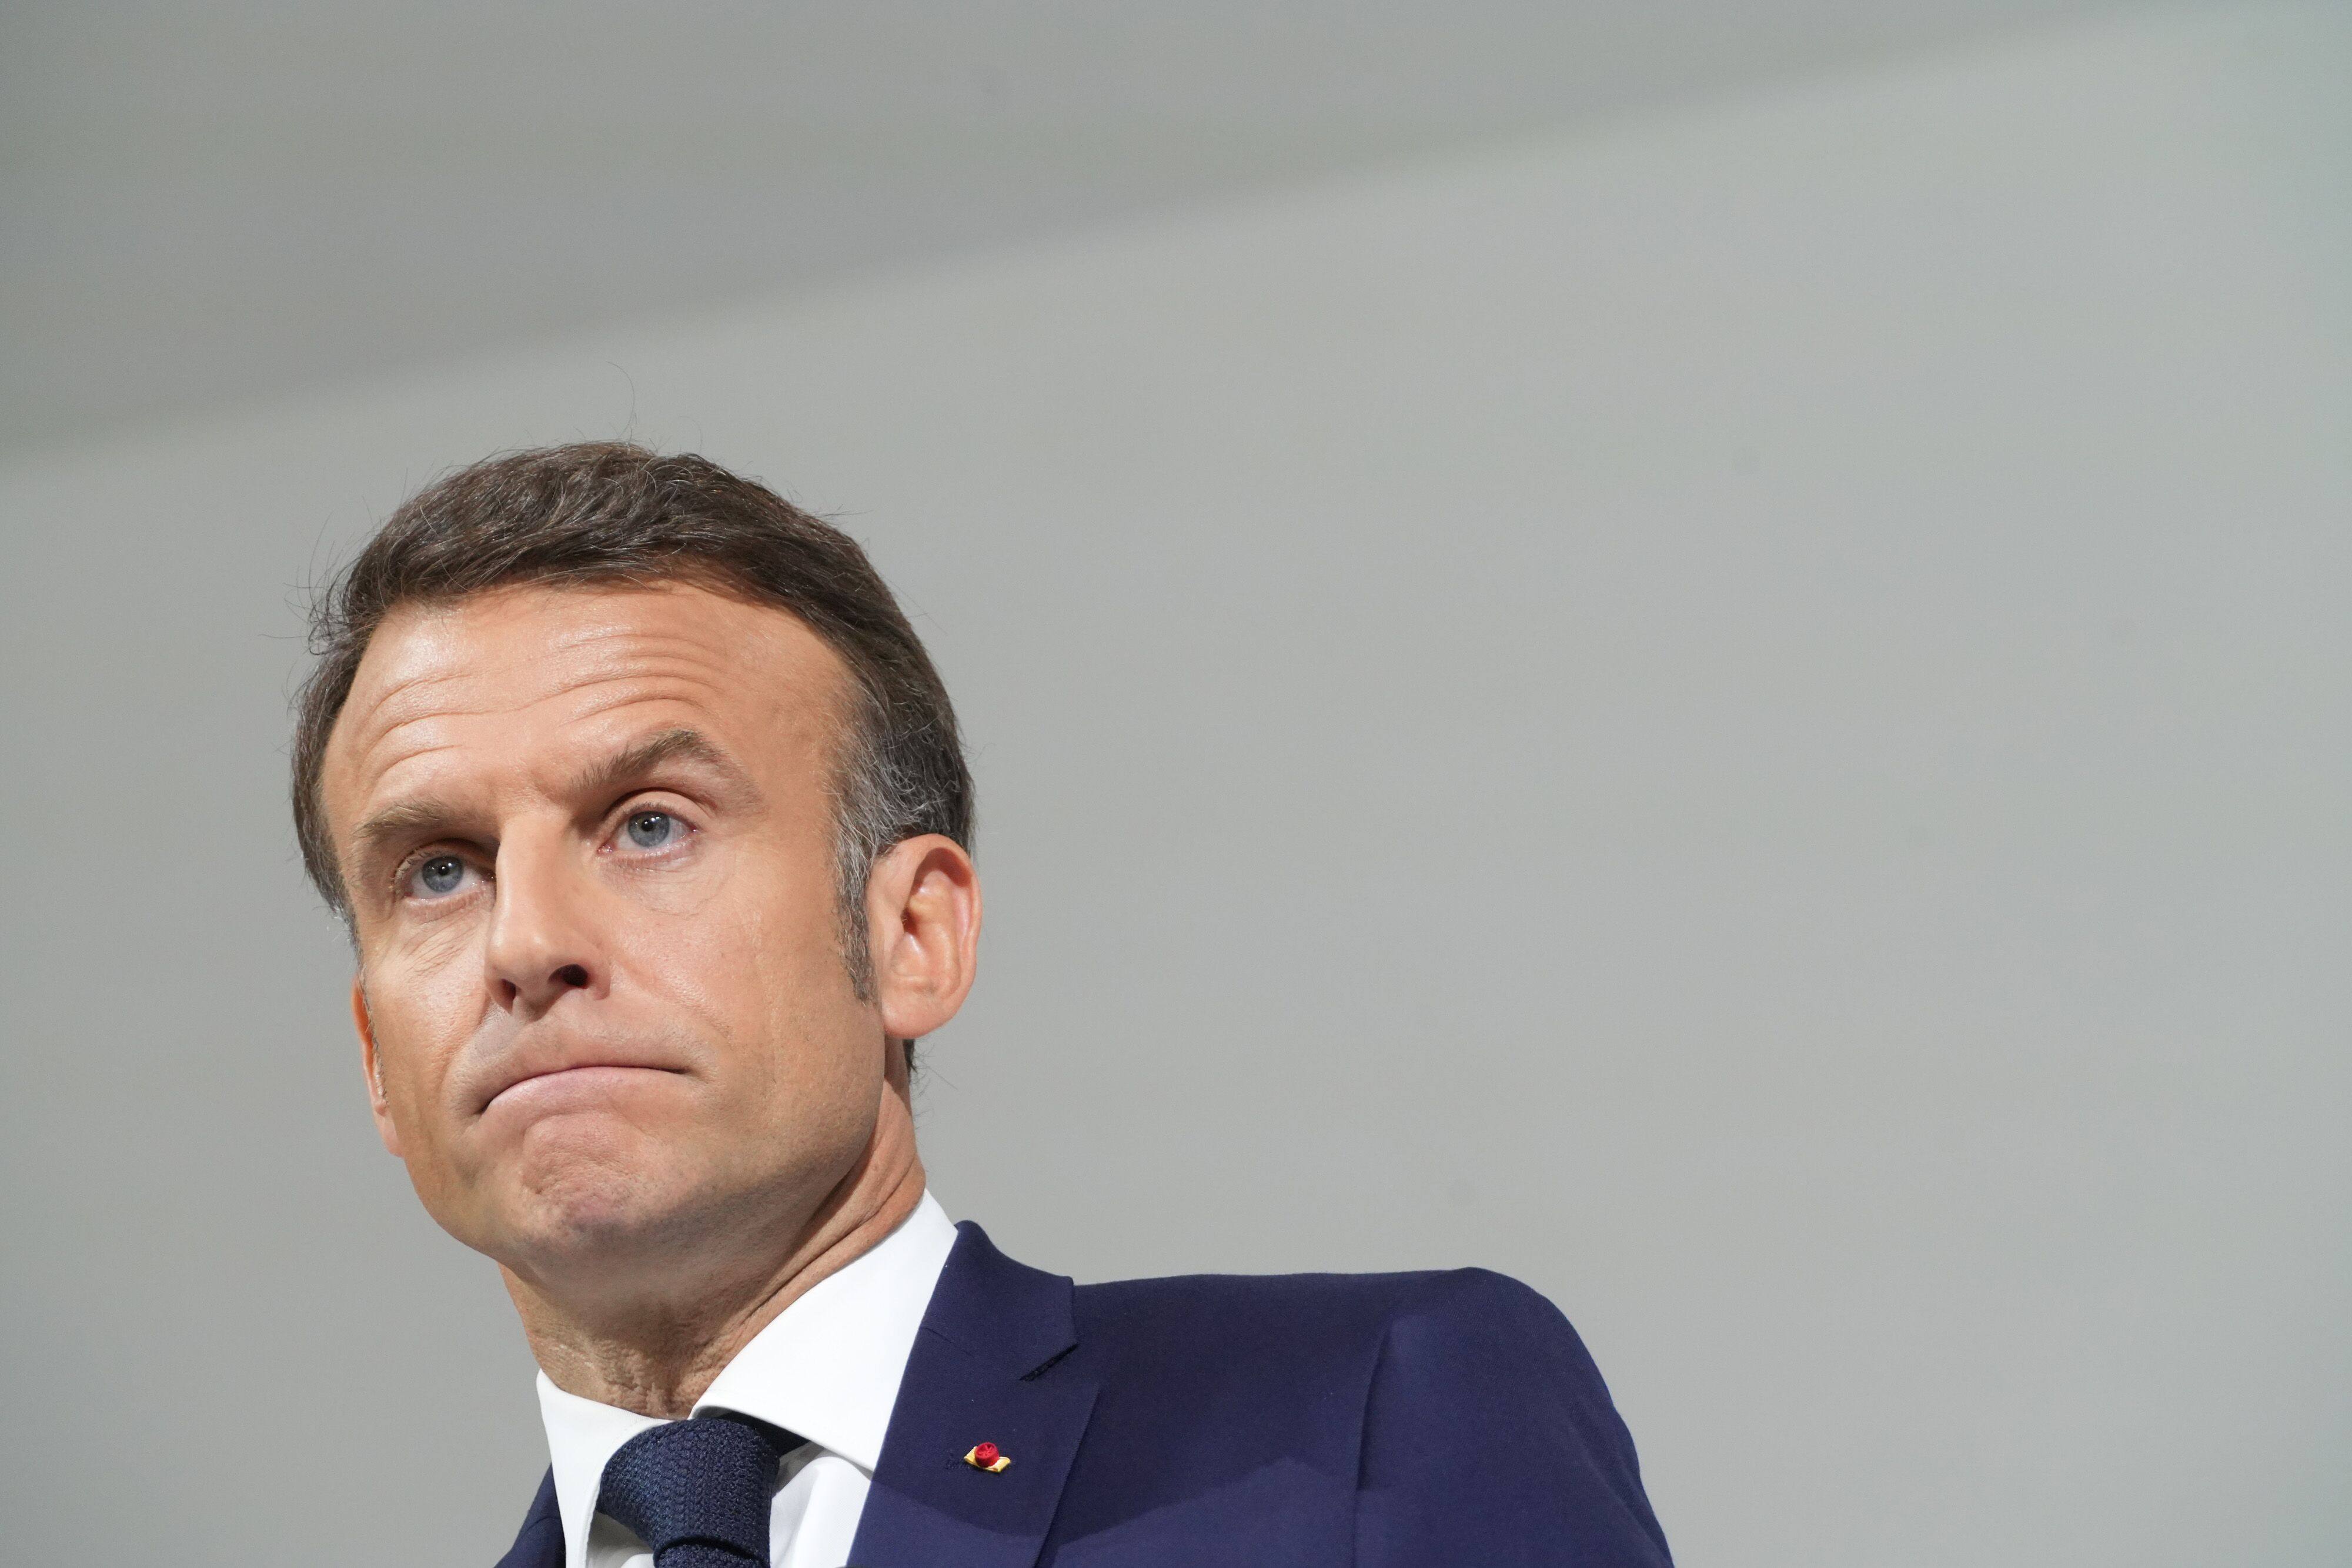 Emmanuel Macron, France’s president, said he won’t resign if his party suffers a poor result in the snap parliamentary election he called on Sunday. Photo: Bloomberg